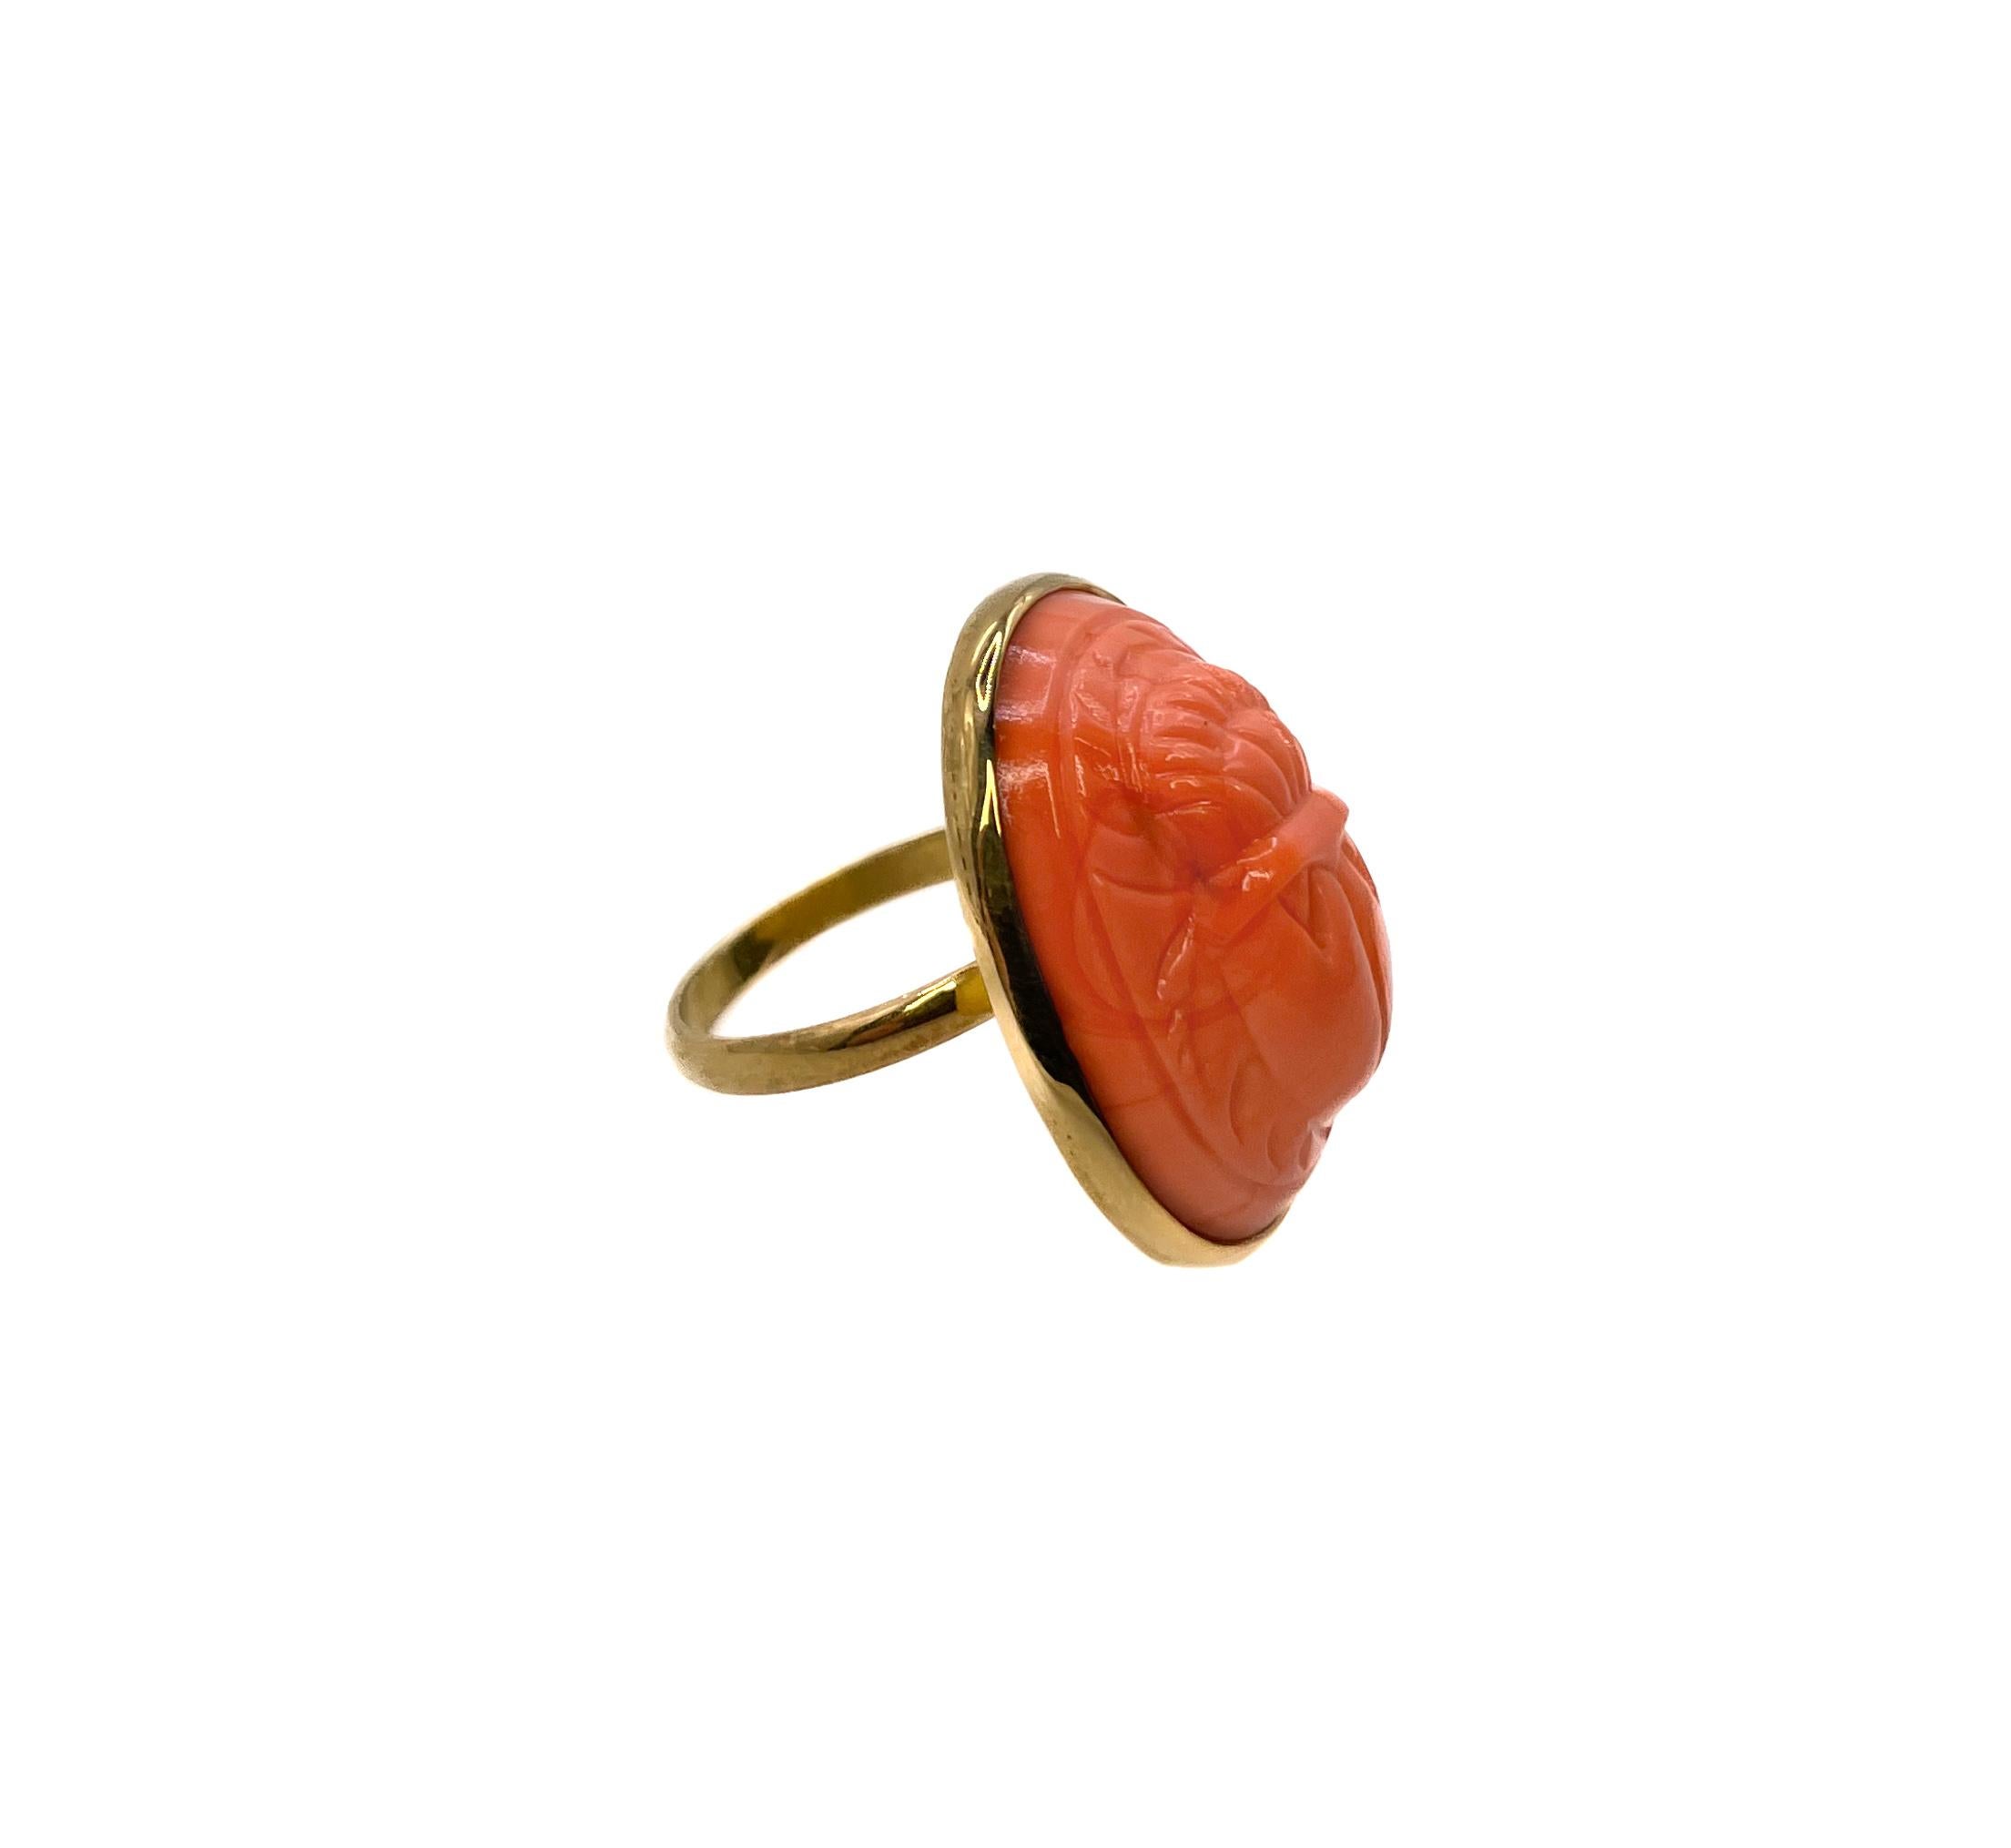 This Scarab ring is made from orange molded glass. The glass was made in the 1950s in Japan. 

The Egyptian Revival style became popularized in Japan in response to the discovery of King Tut's Tomb in 1922. Scarabs were sacred in ancient Egypt and